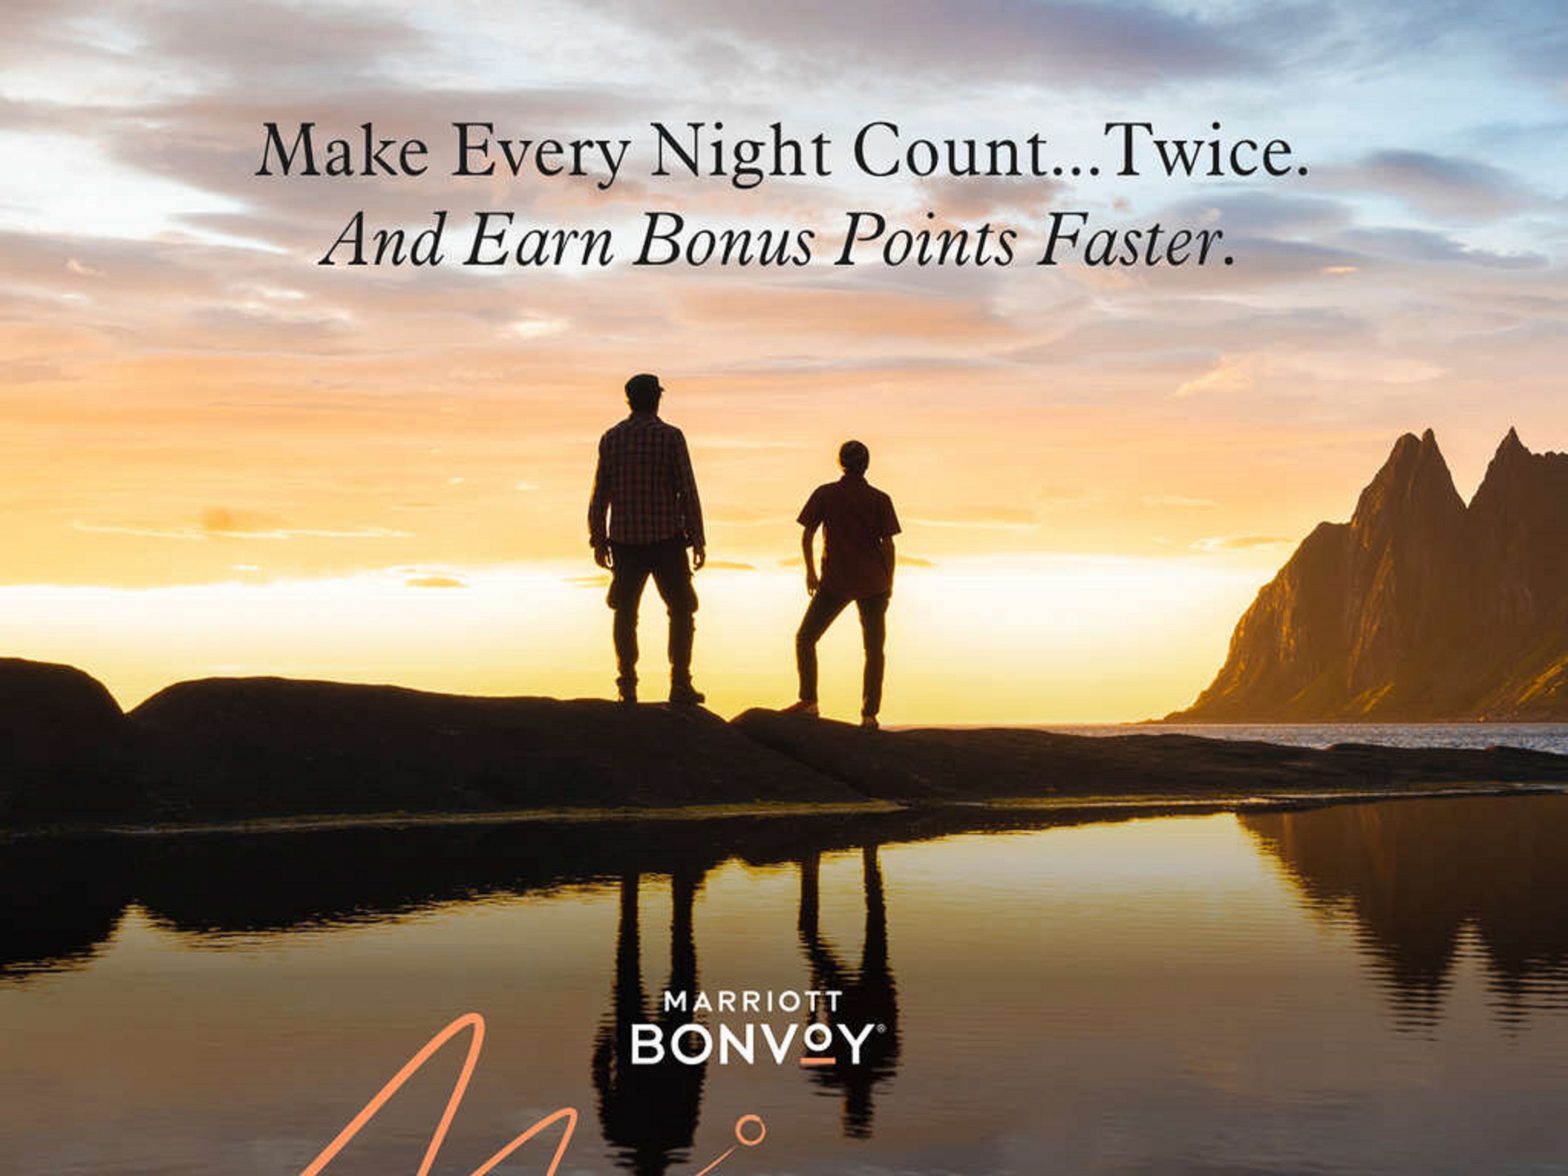 Marriott Bonvoy’s latest promotion makes each night count twice for